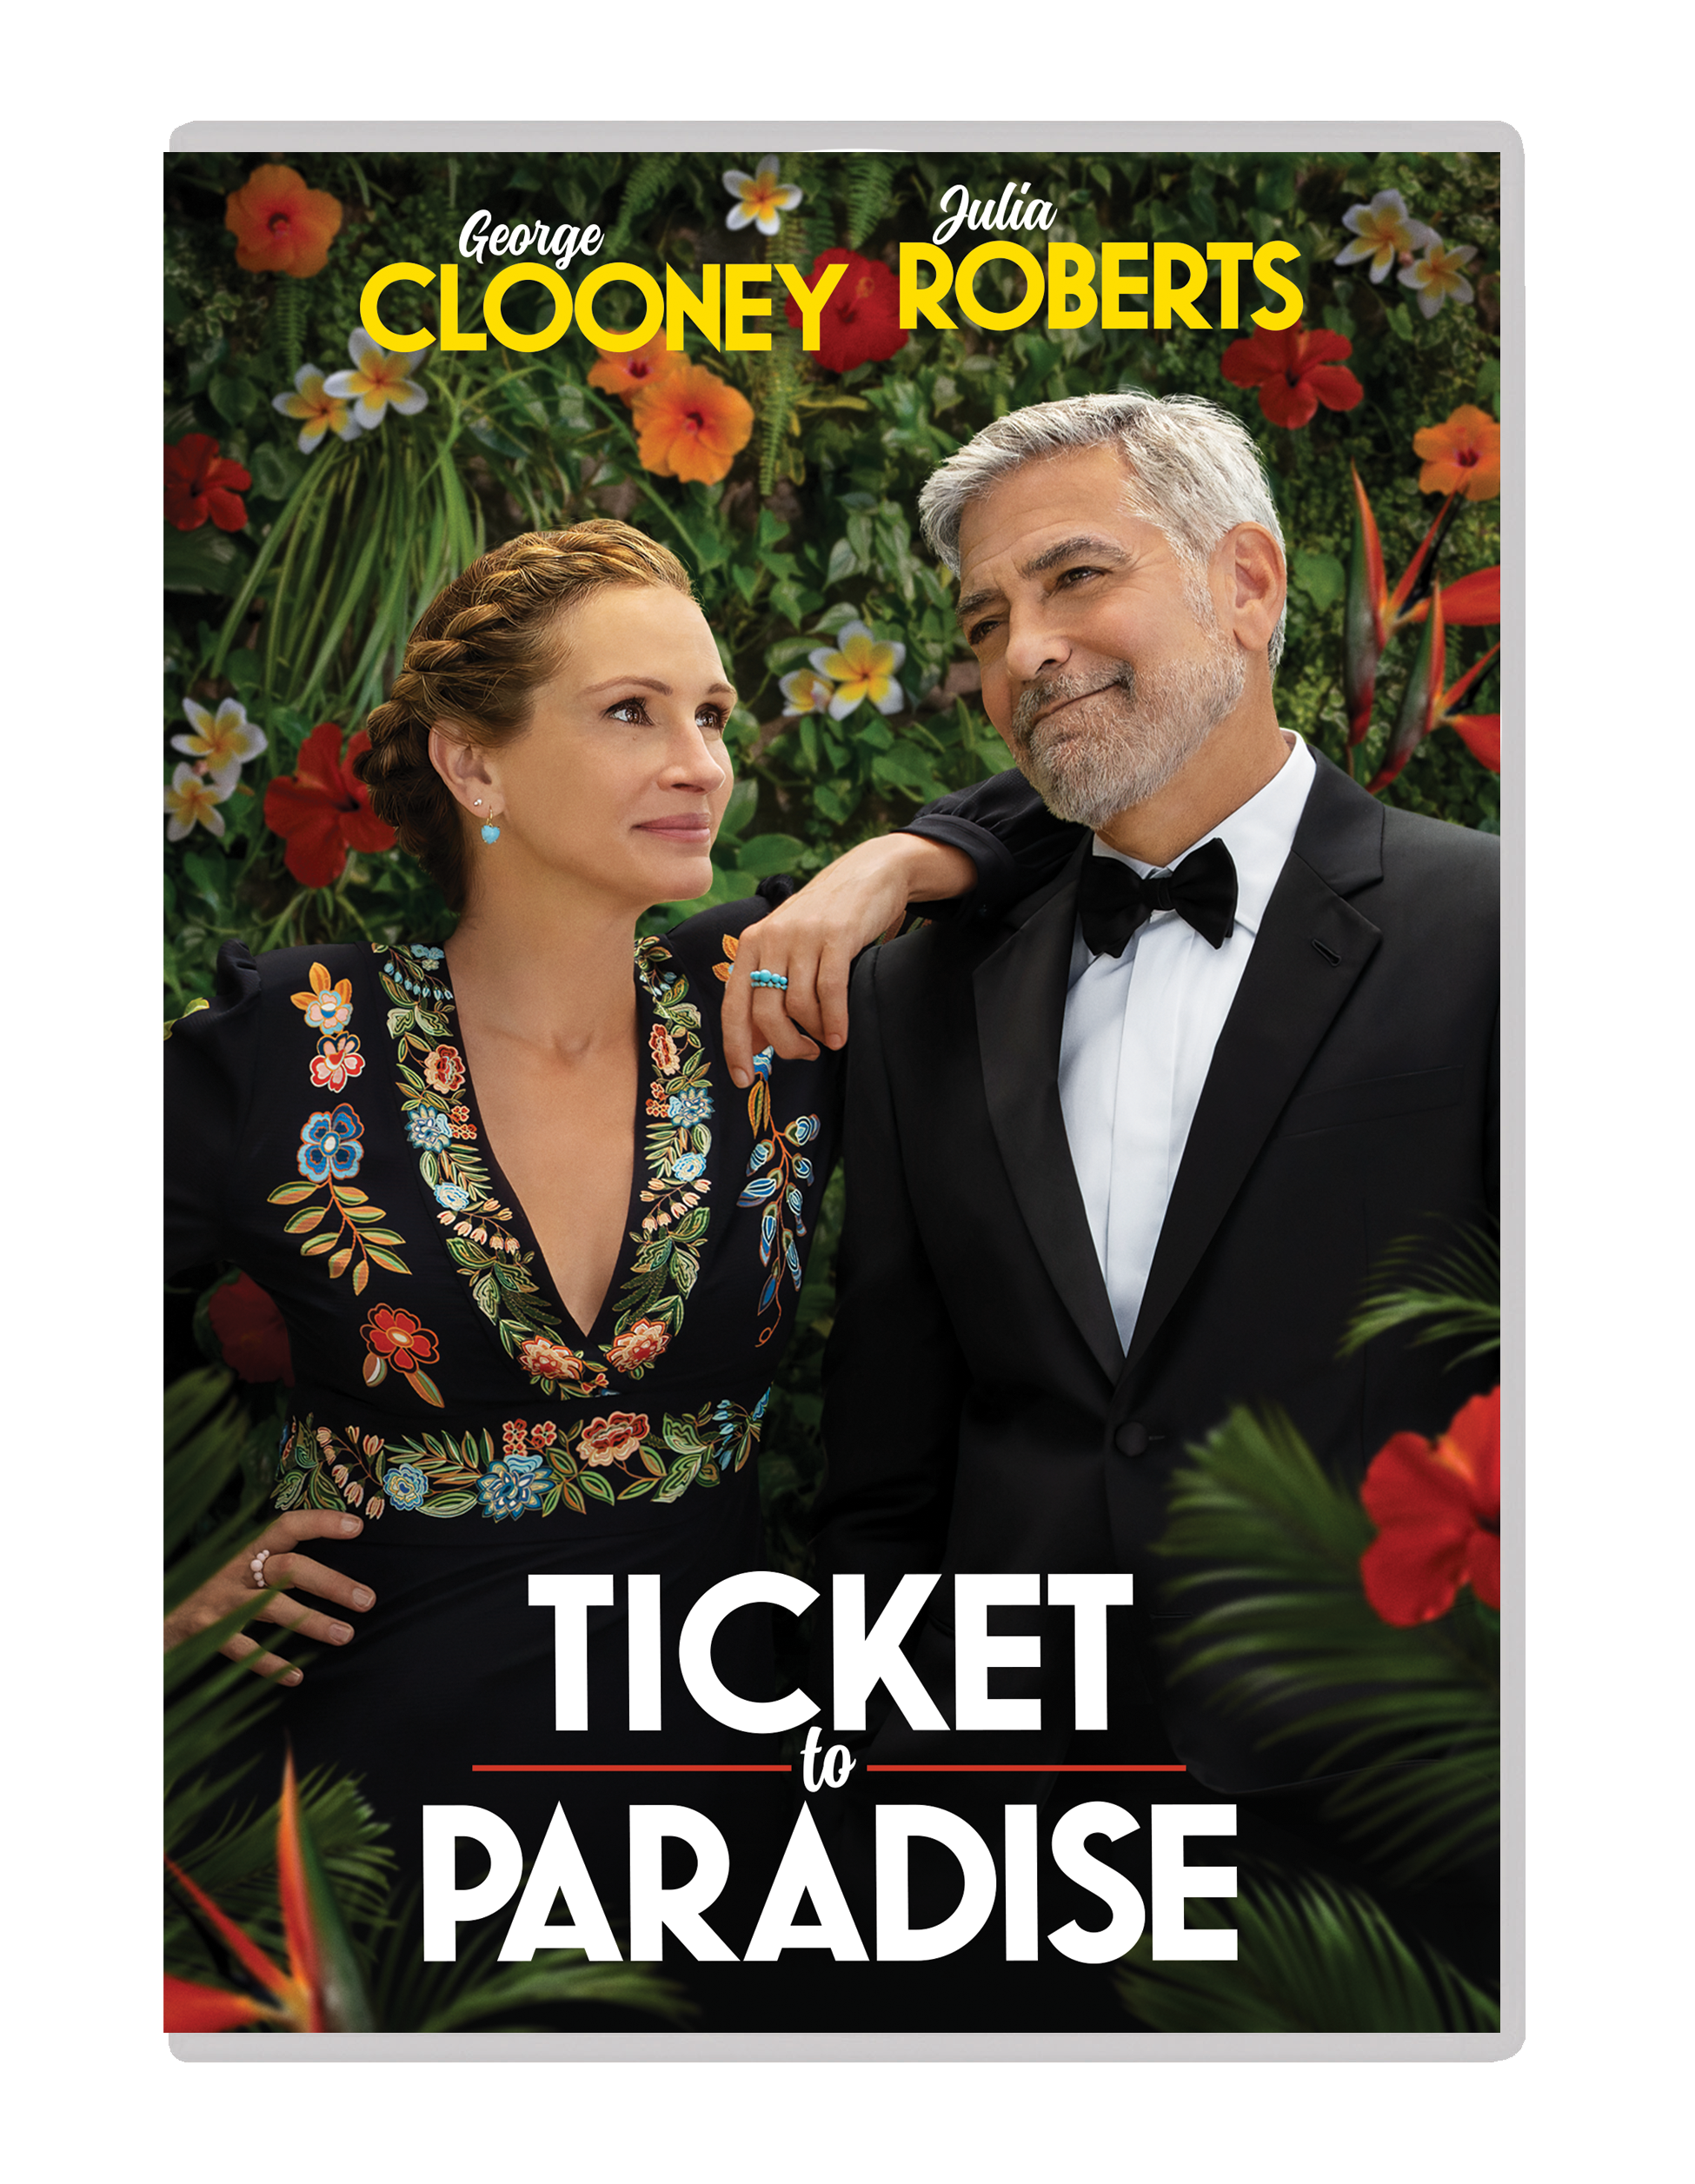 Ticket to Paradise (DVD)